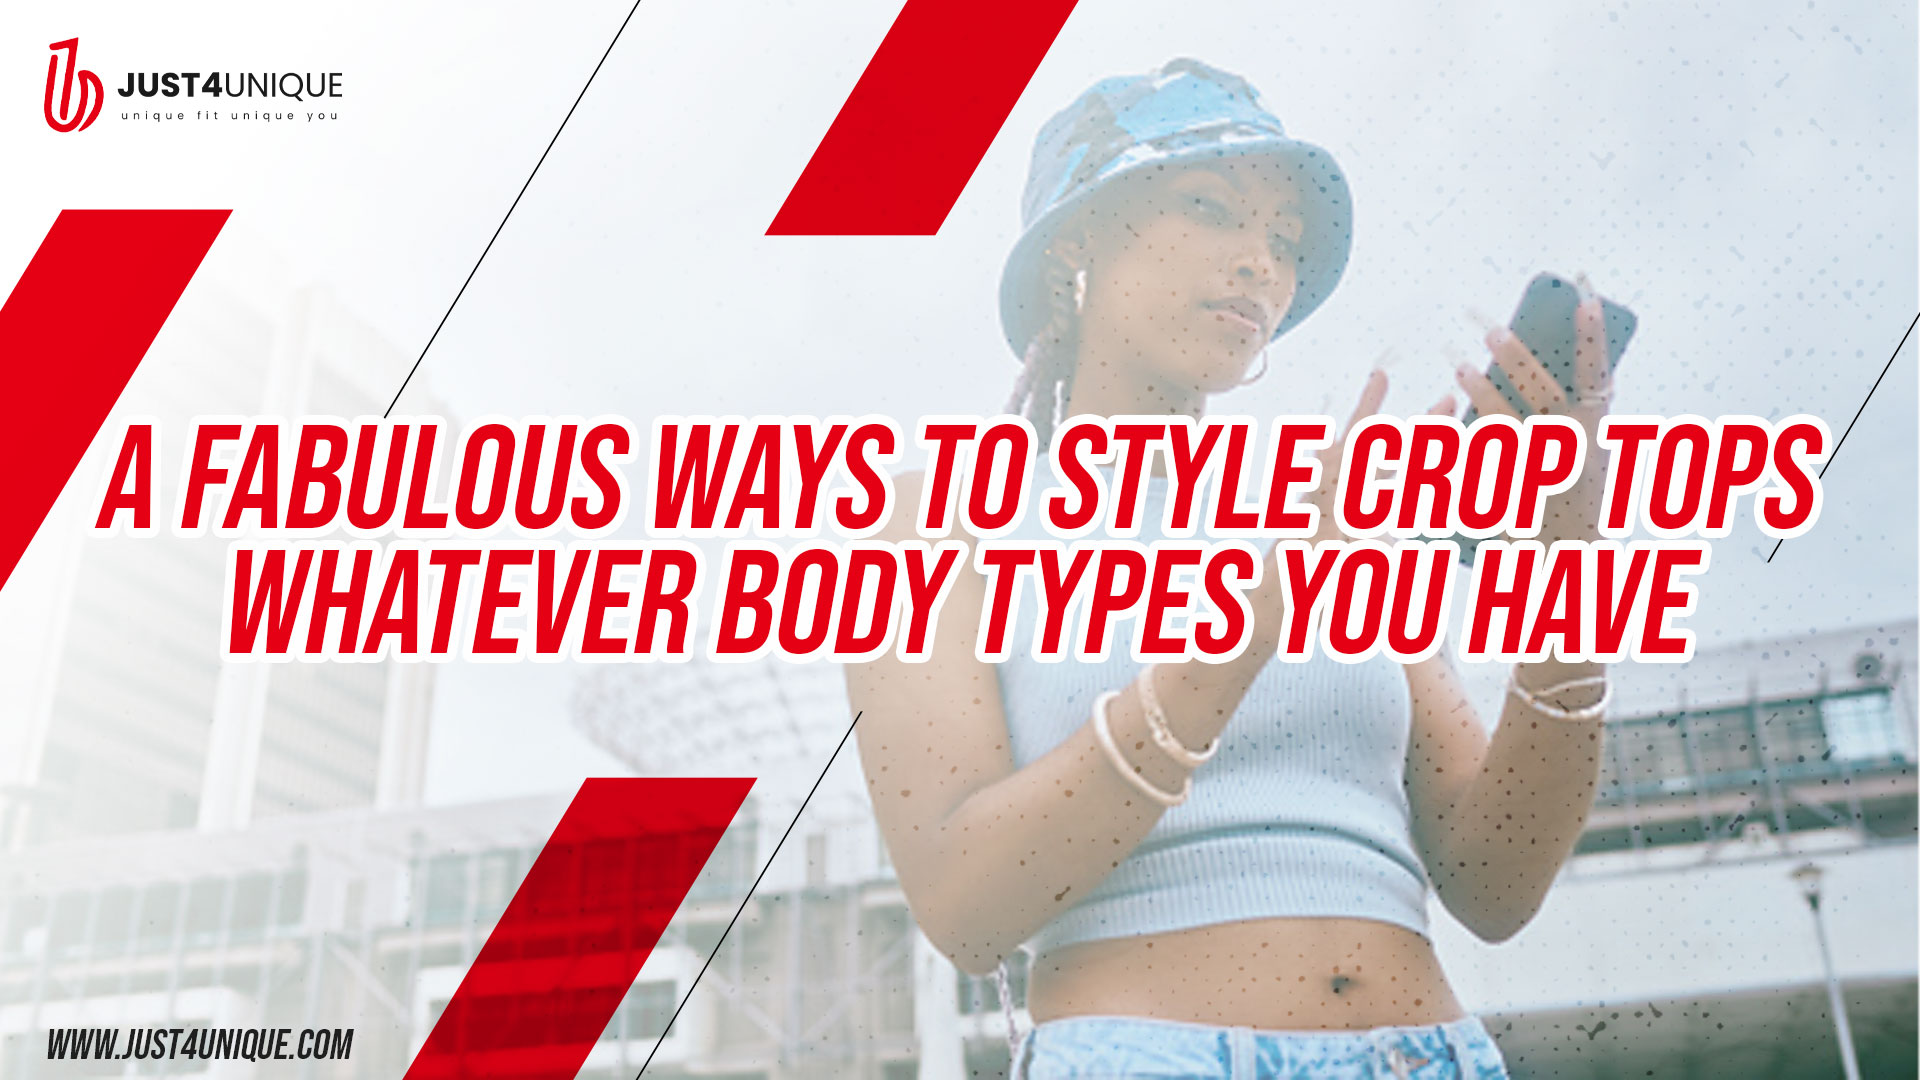 Ways to Style Crop Tops